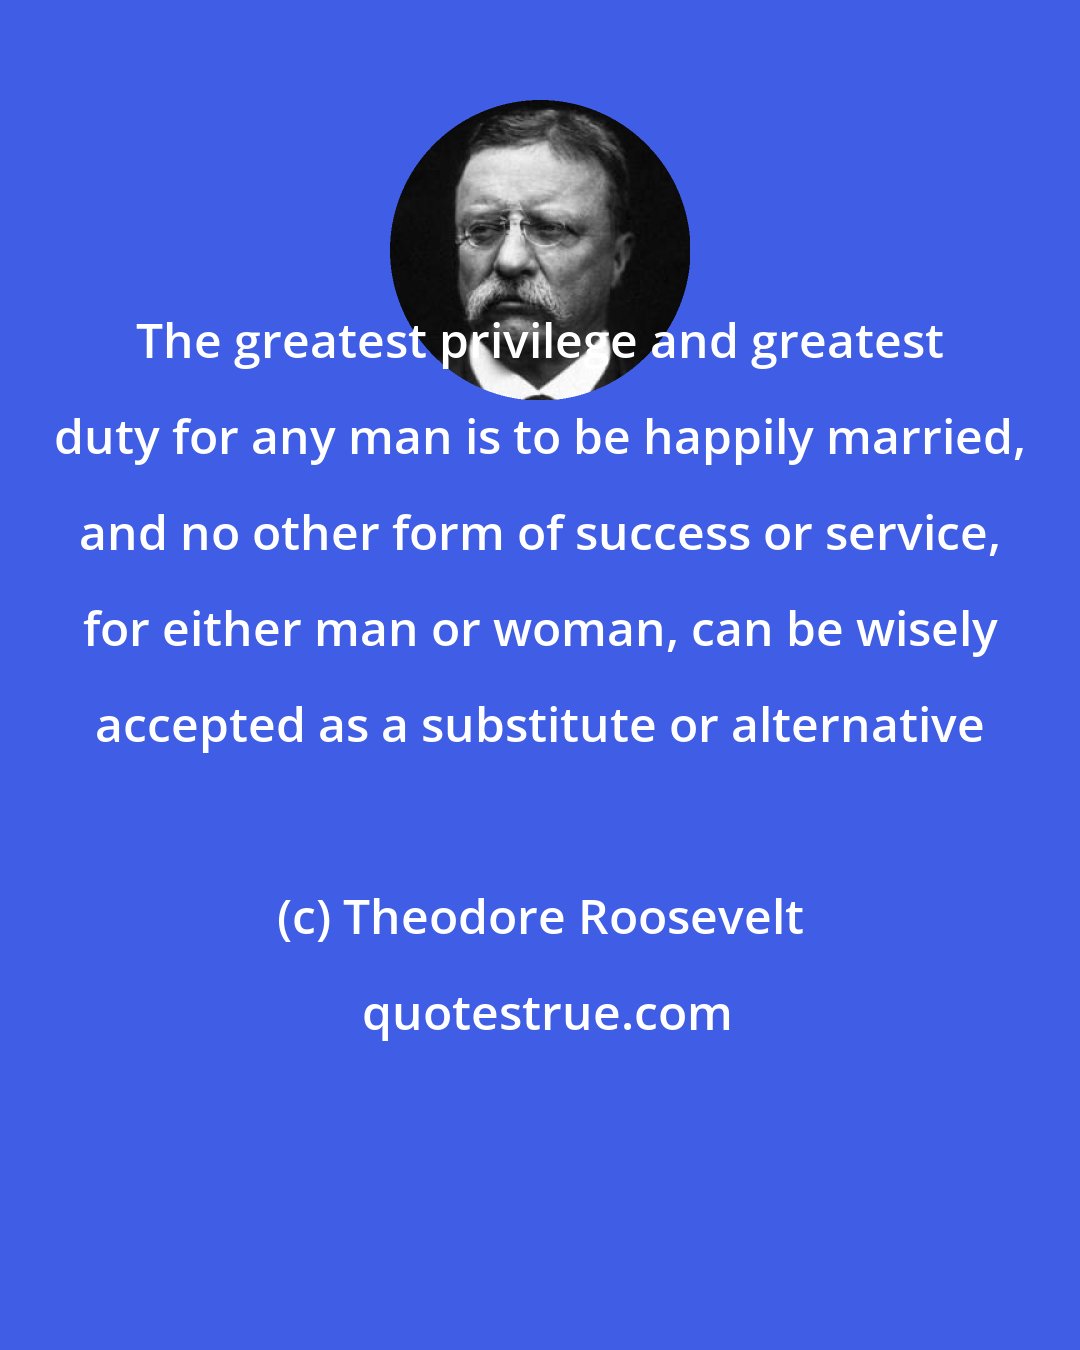 Theodore Roosevelt: The greatest privilege and greatest duty for any man is to be happily married, and no other form of success or service, for either man or woman, can be wisely accepted as a substitute or alternative